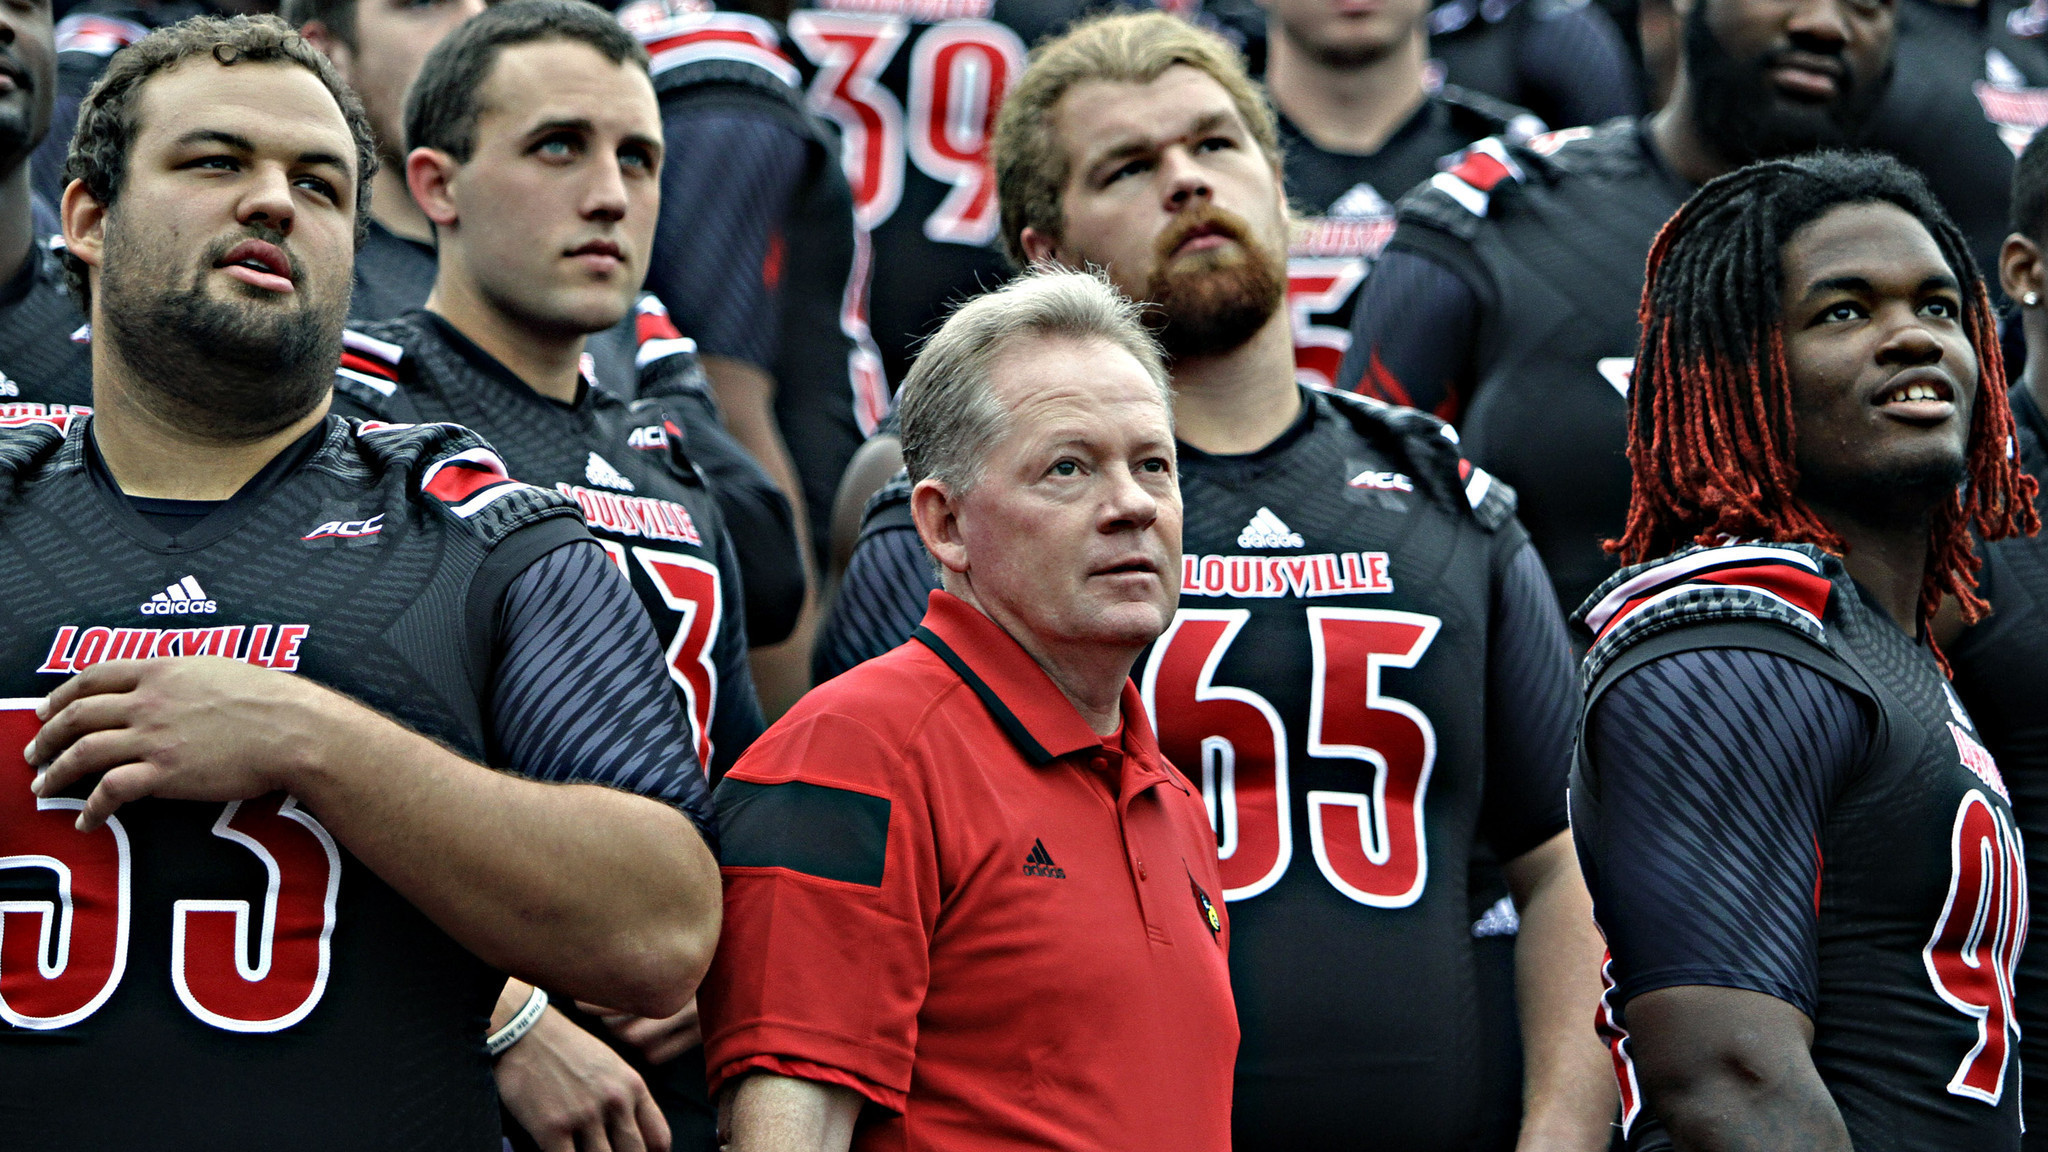 Louisville coach Bobby Petrino on embracing expectations, challenges in 2016 - Orlando Sentinel